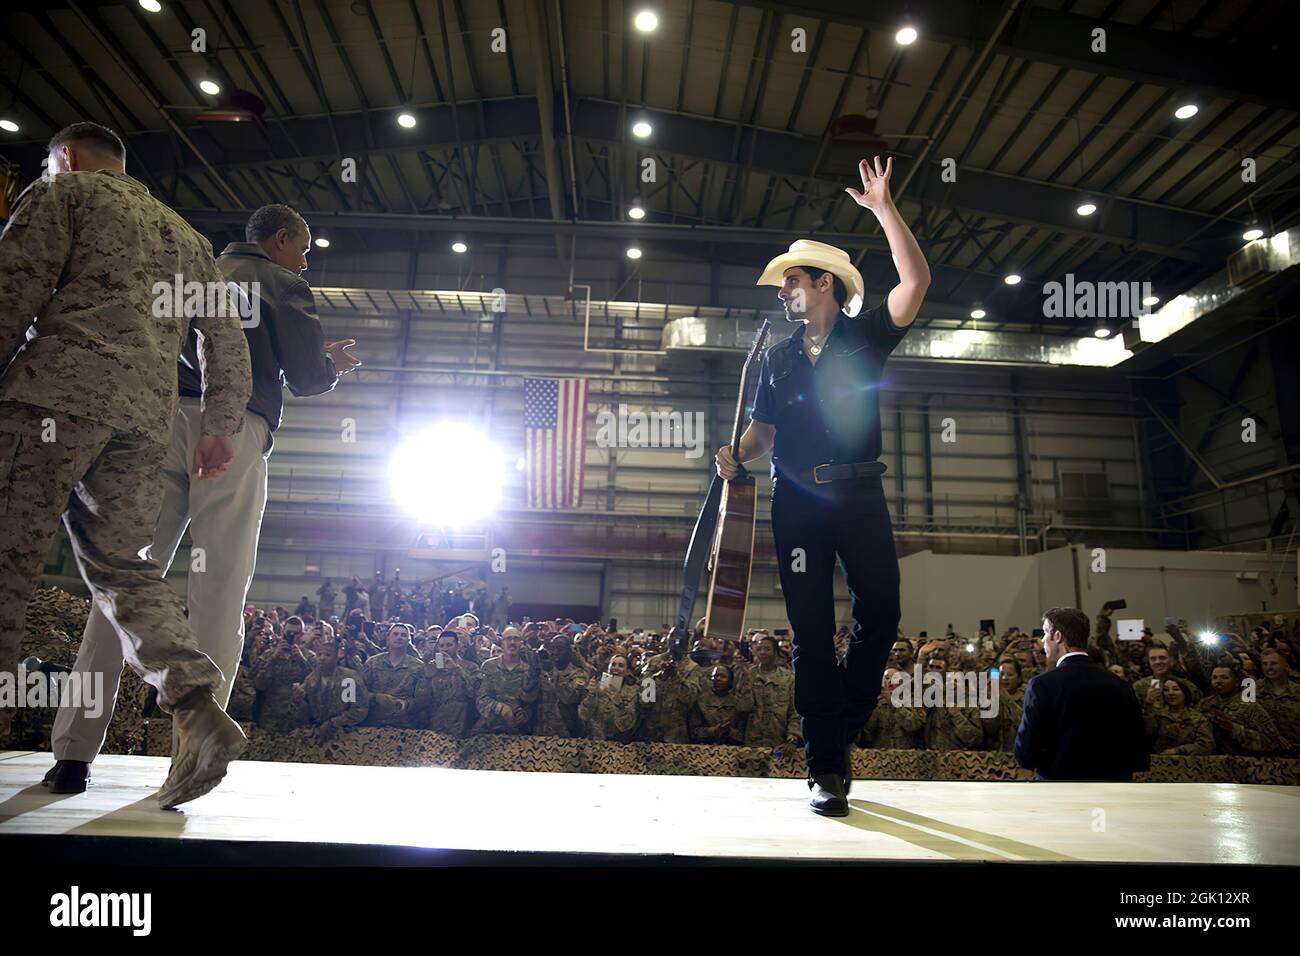 Country singer Brad Paisley leaves the stage as President Barack Obama and Gen. Joseph F. Dunford, Jr, Commander of International Security Assistance Force and United States Forces-Afghanistan arrive to address U.S. troops during a rally at Bagram Airfield, Afghanistan, Sunday, May 25, 2014. (Official White House Photo by Pete Souza) This official White House photograph is being made available only for publication by news organizations and/or for personal use printing by the subject(s) of the photograph. The photograph may not be manipulated in any way and may not be used in commercial or poli Stock Photo